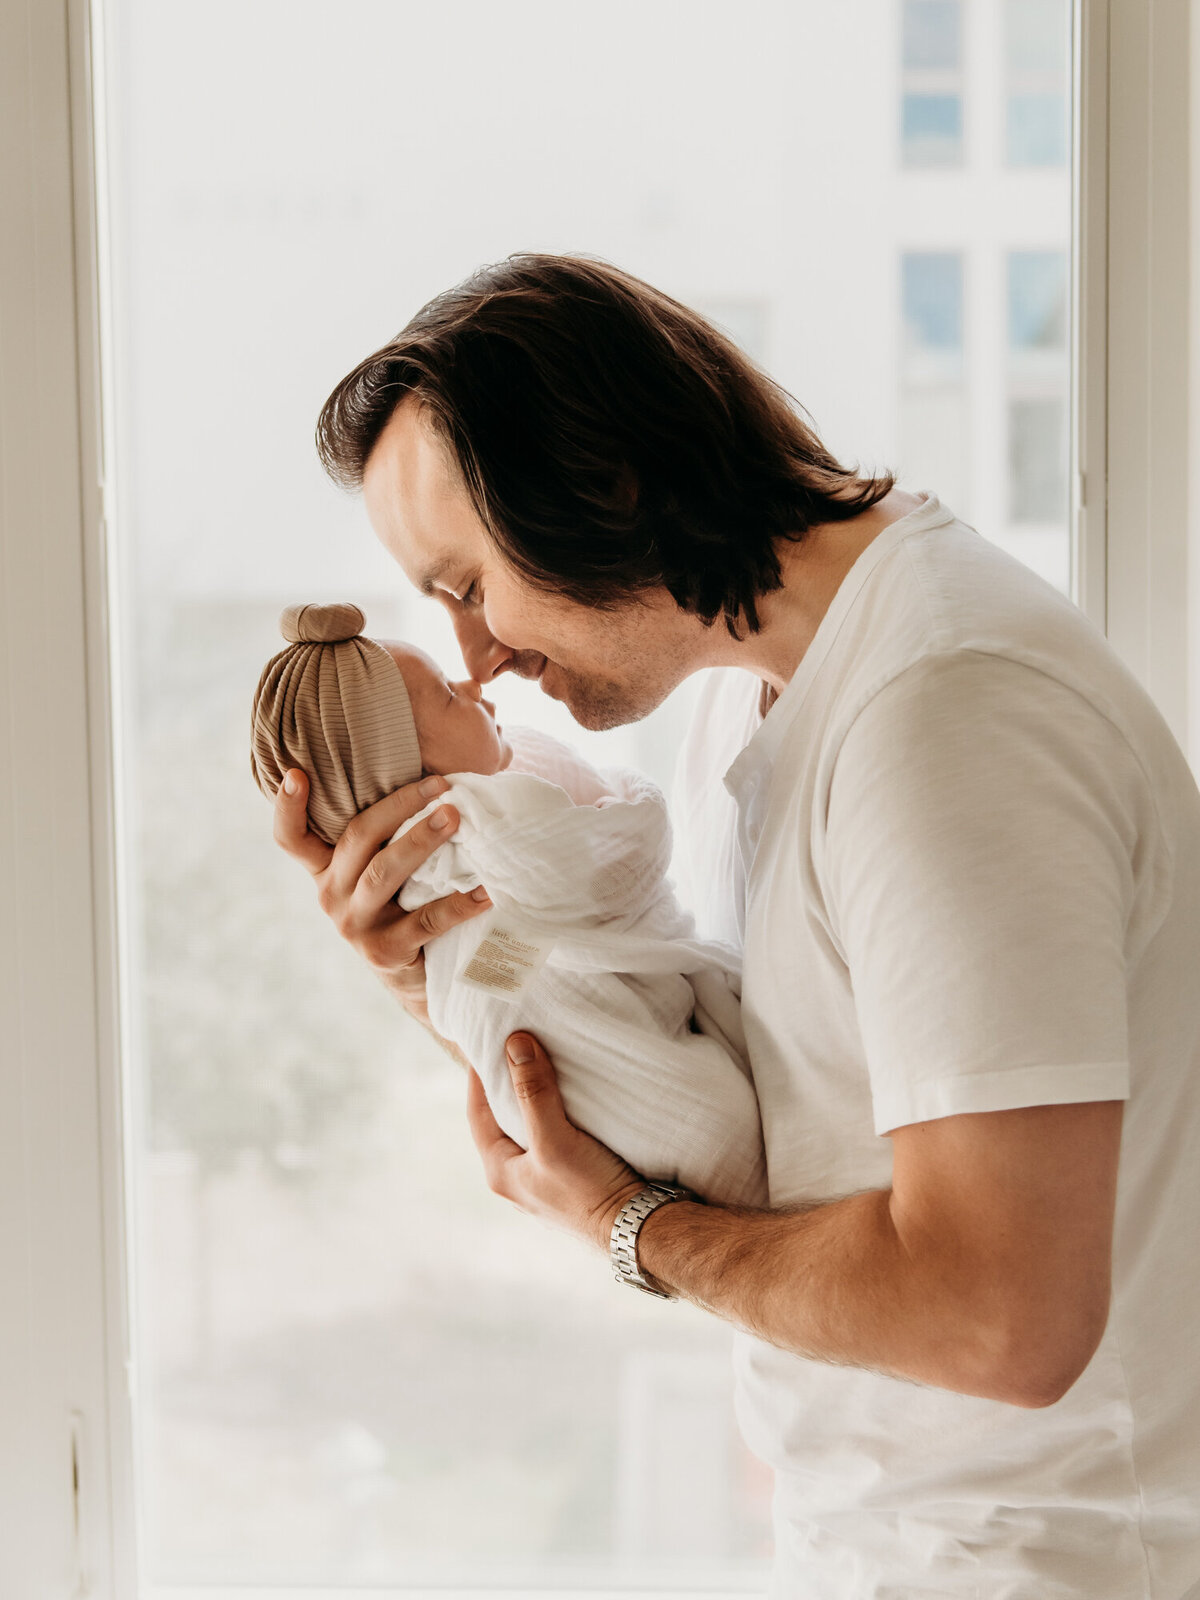 Newborn Photography, Dad kissing baby girl on the nose by the window.